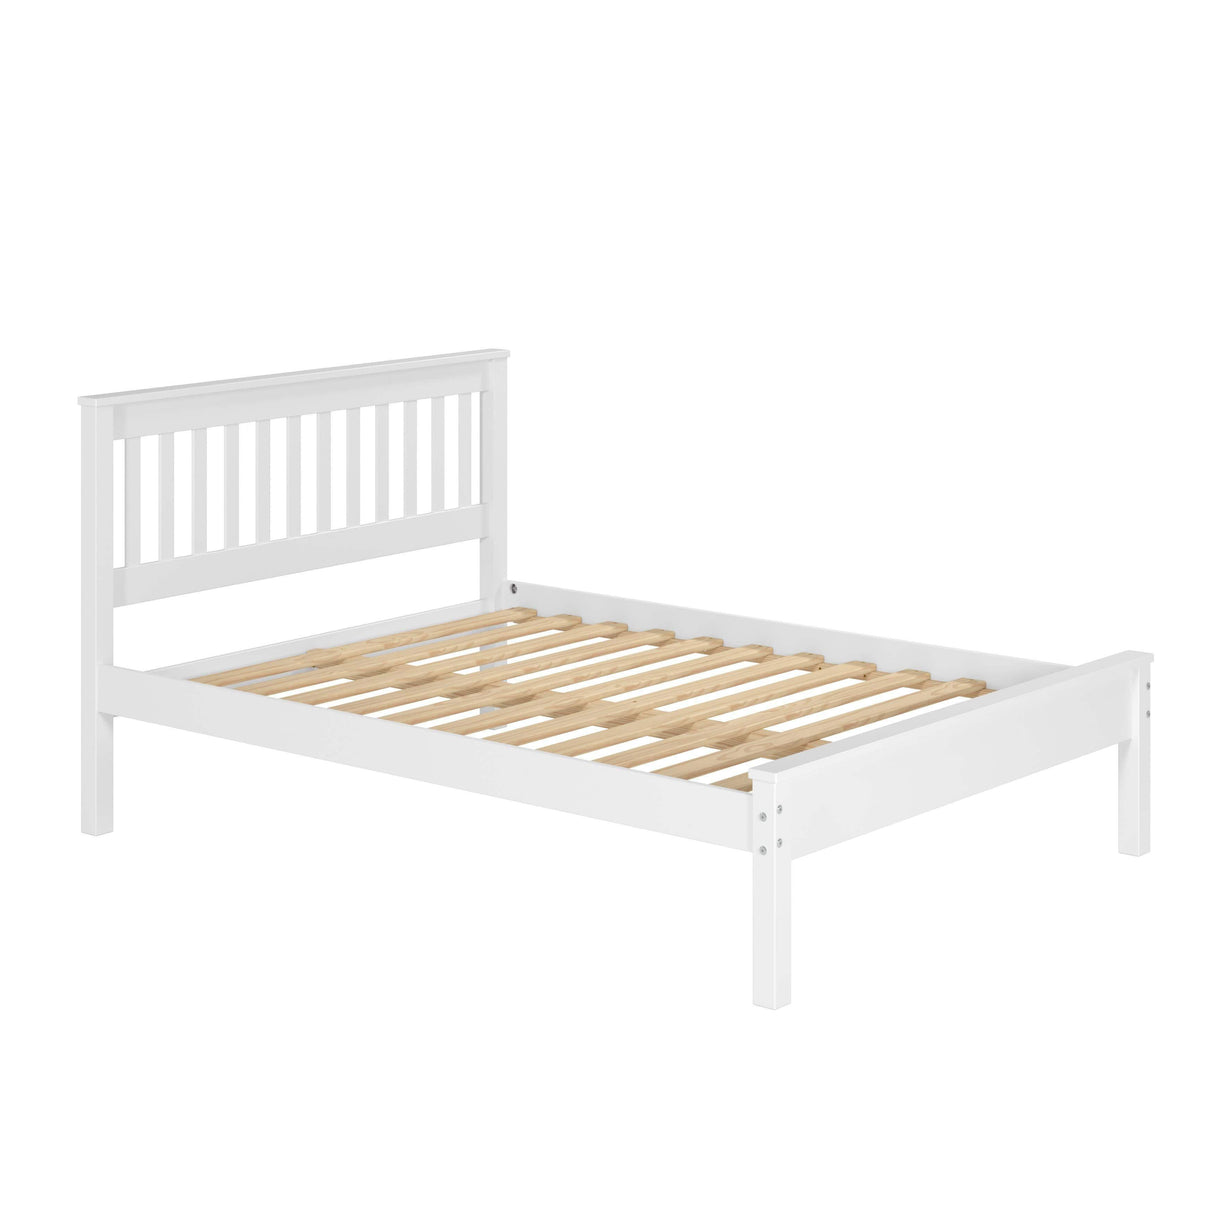 Donco Full Contempo Bed White 500-FW - Bedroom Depot USA